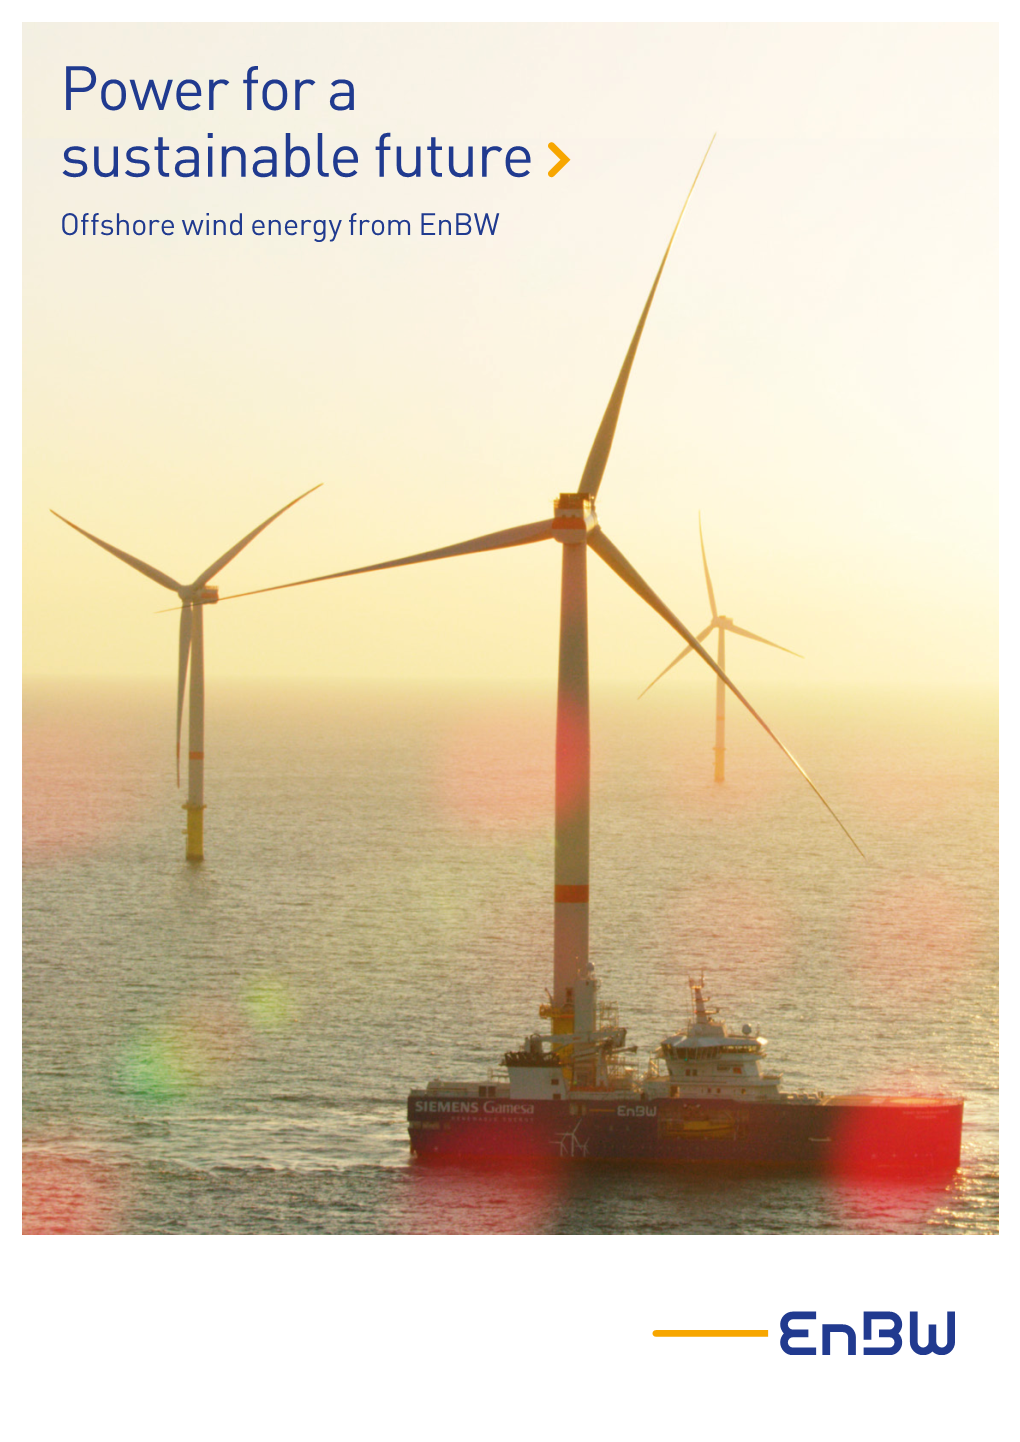 Offshore Wind Energy from Enbw 2 Power for a Sustainable Future › Offshore Enbw Wind Farms in the North Sea 3